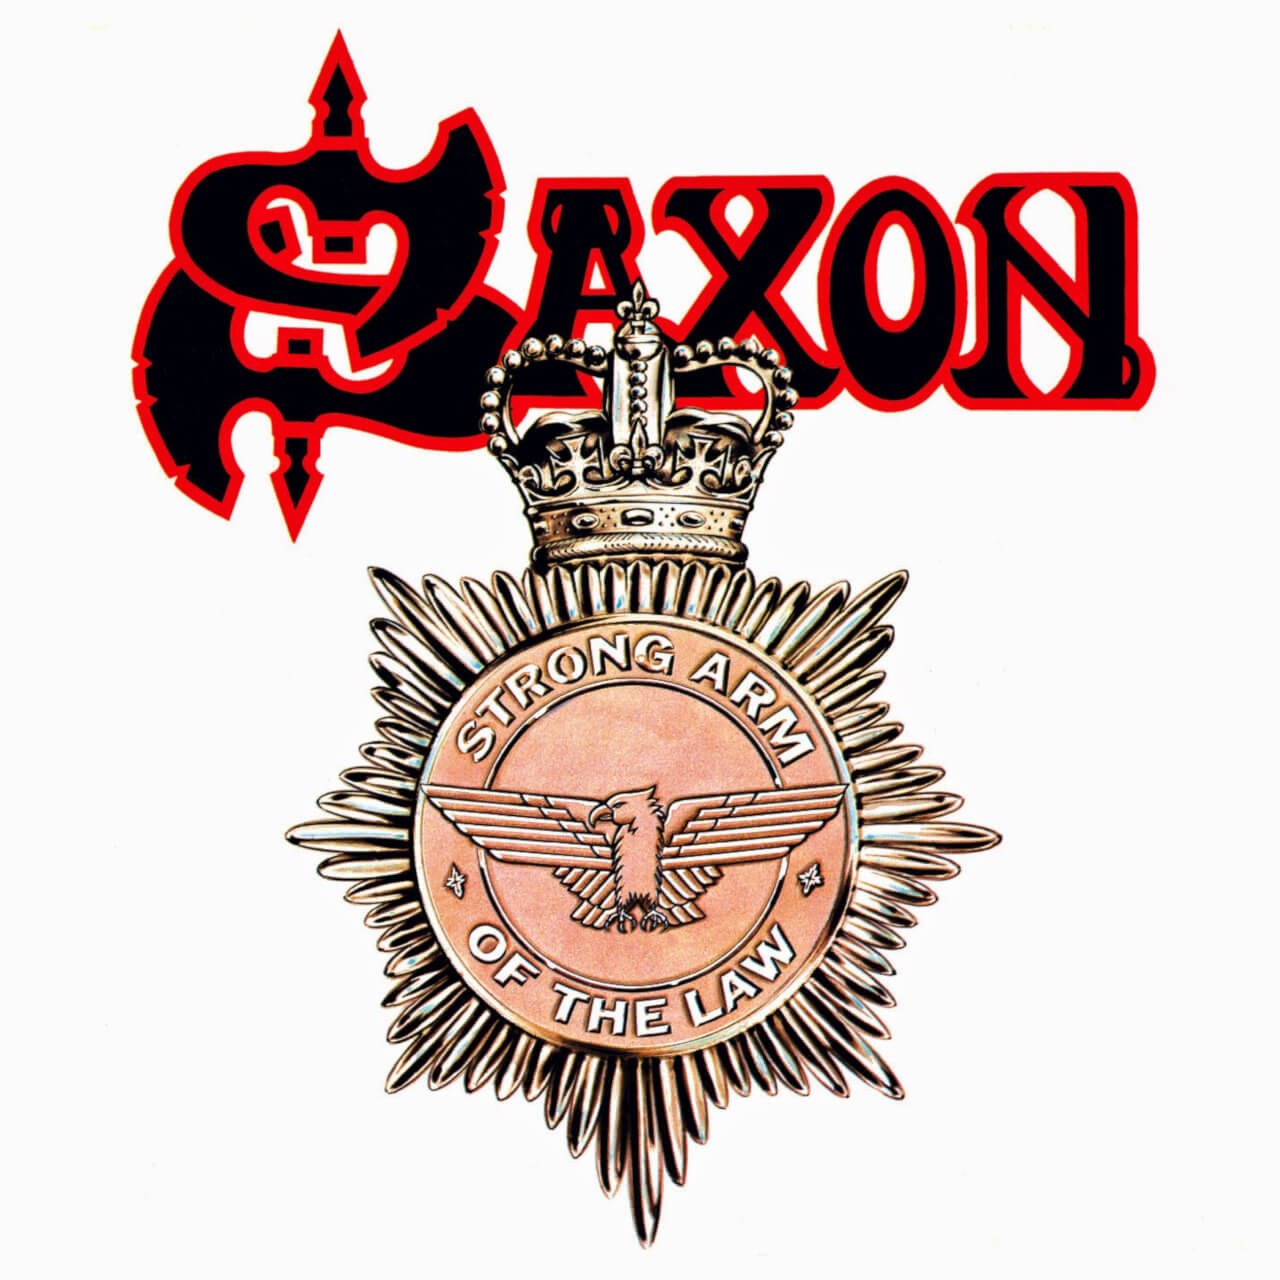 Saxon Strong Arm of Law